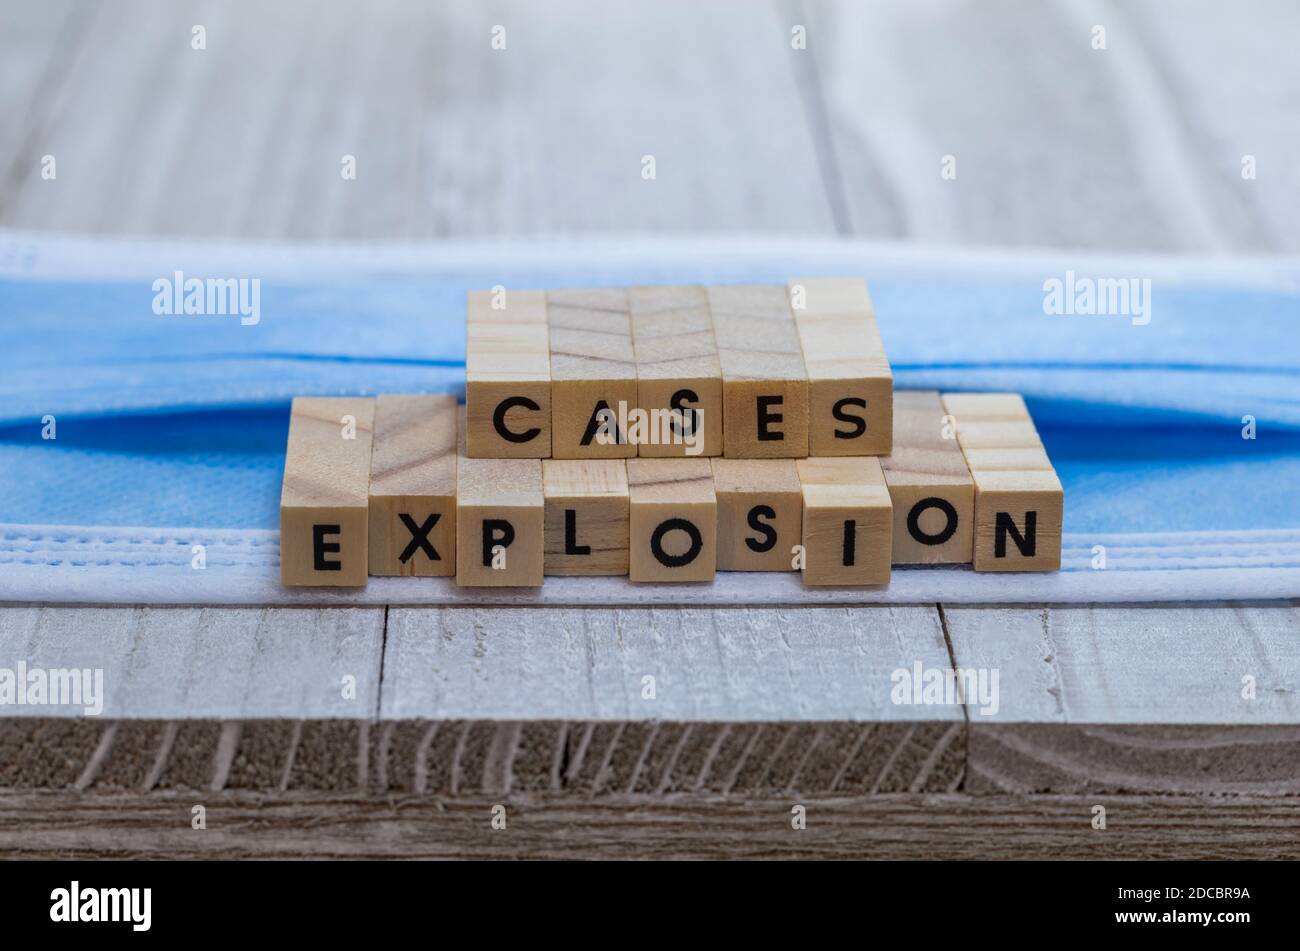 EXPLOSION of cases on face mask covid pandemic alert concept wood block letters on board cool blue tone background Stock Photo